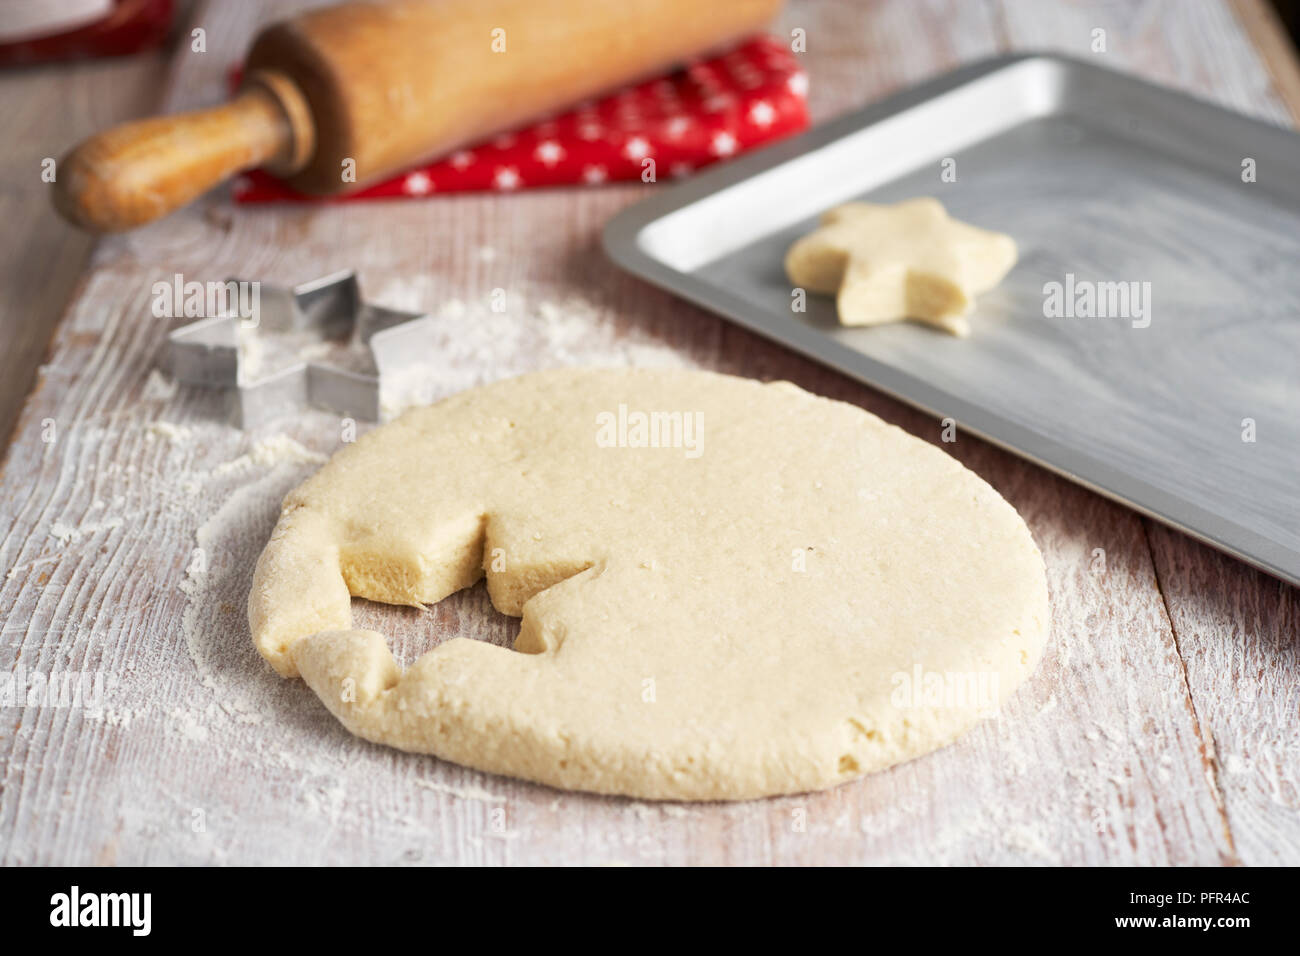 Star shape scone cut from dough Stock Photo